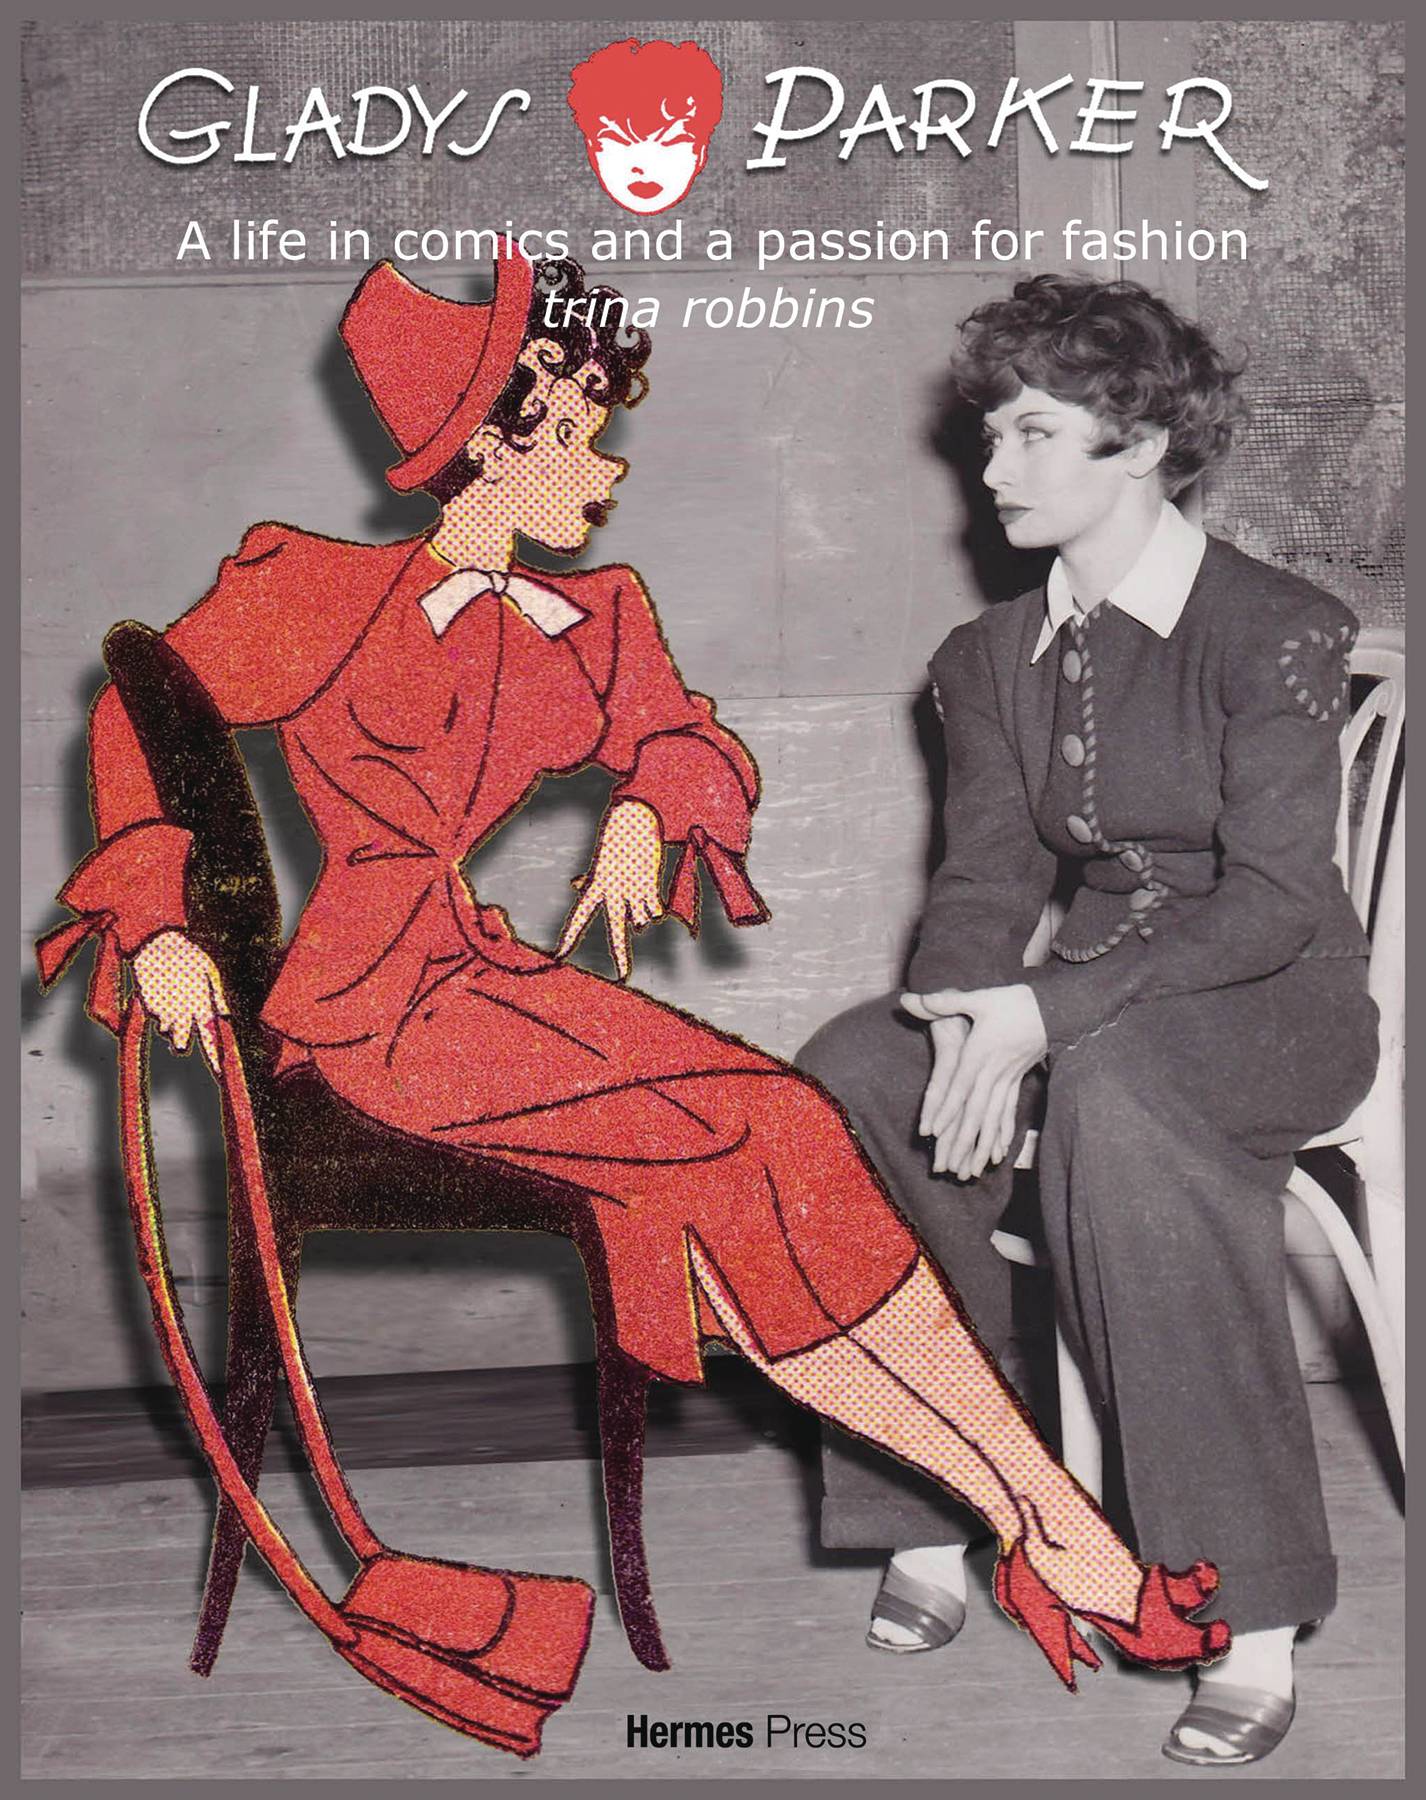 GLADYS PARKER LIFE IN COMICS PASSION FOR FASHION HC (RES) (C